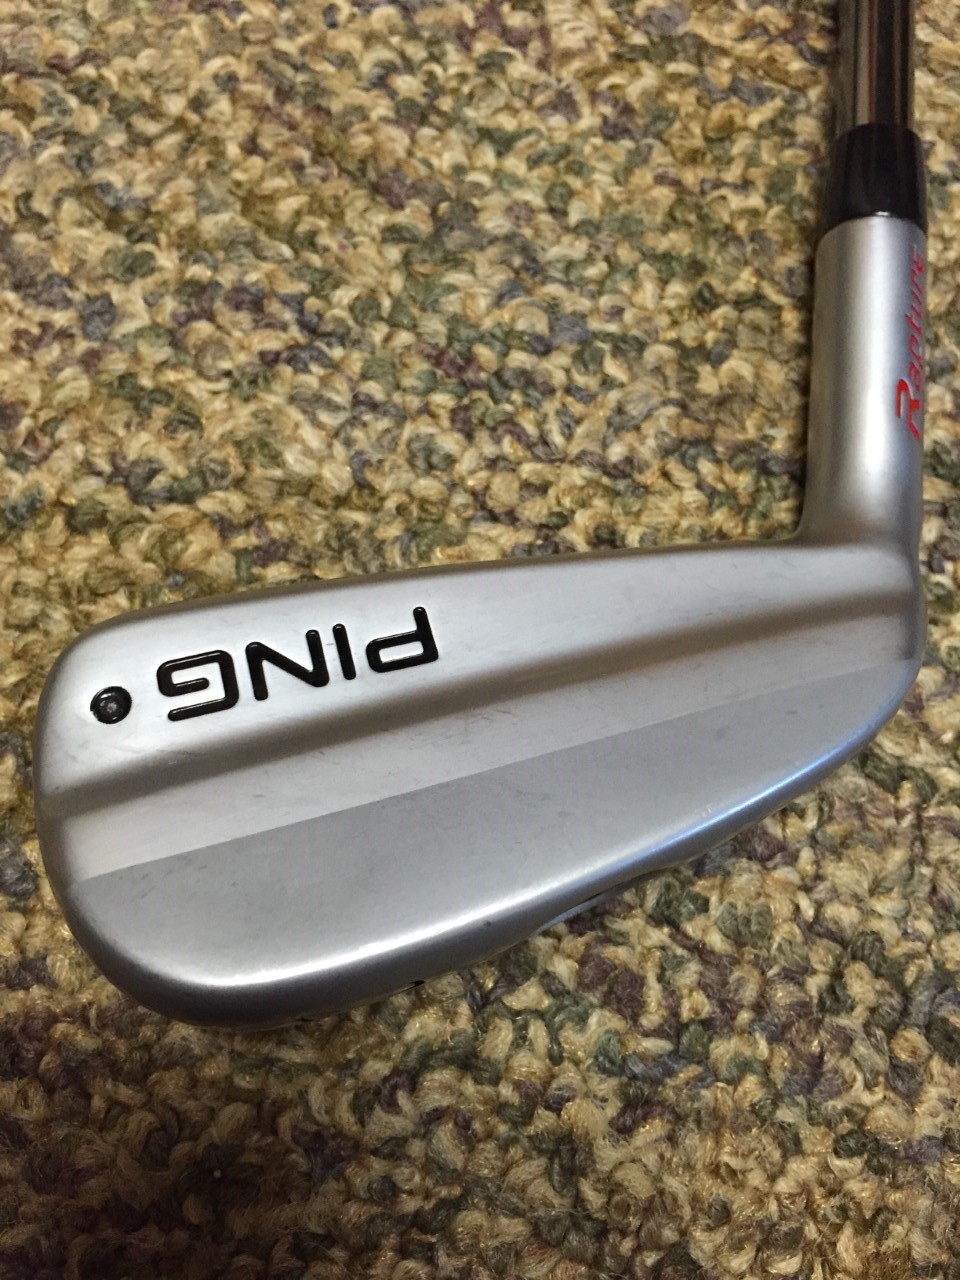 ping rapture 2 iron review